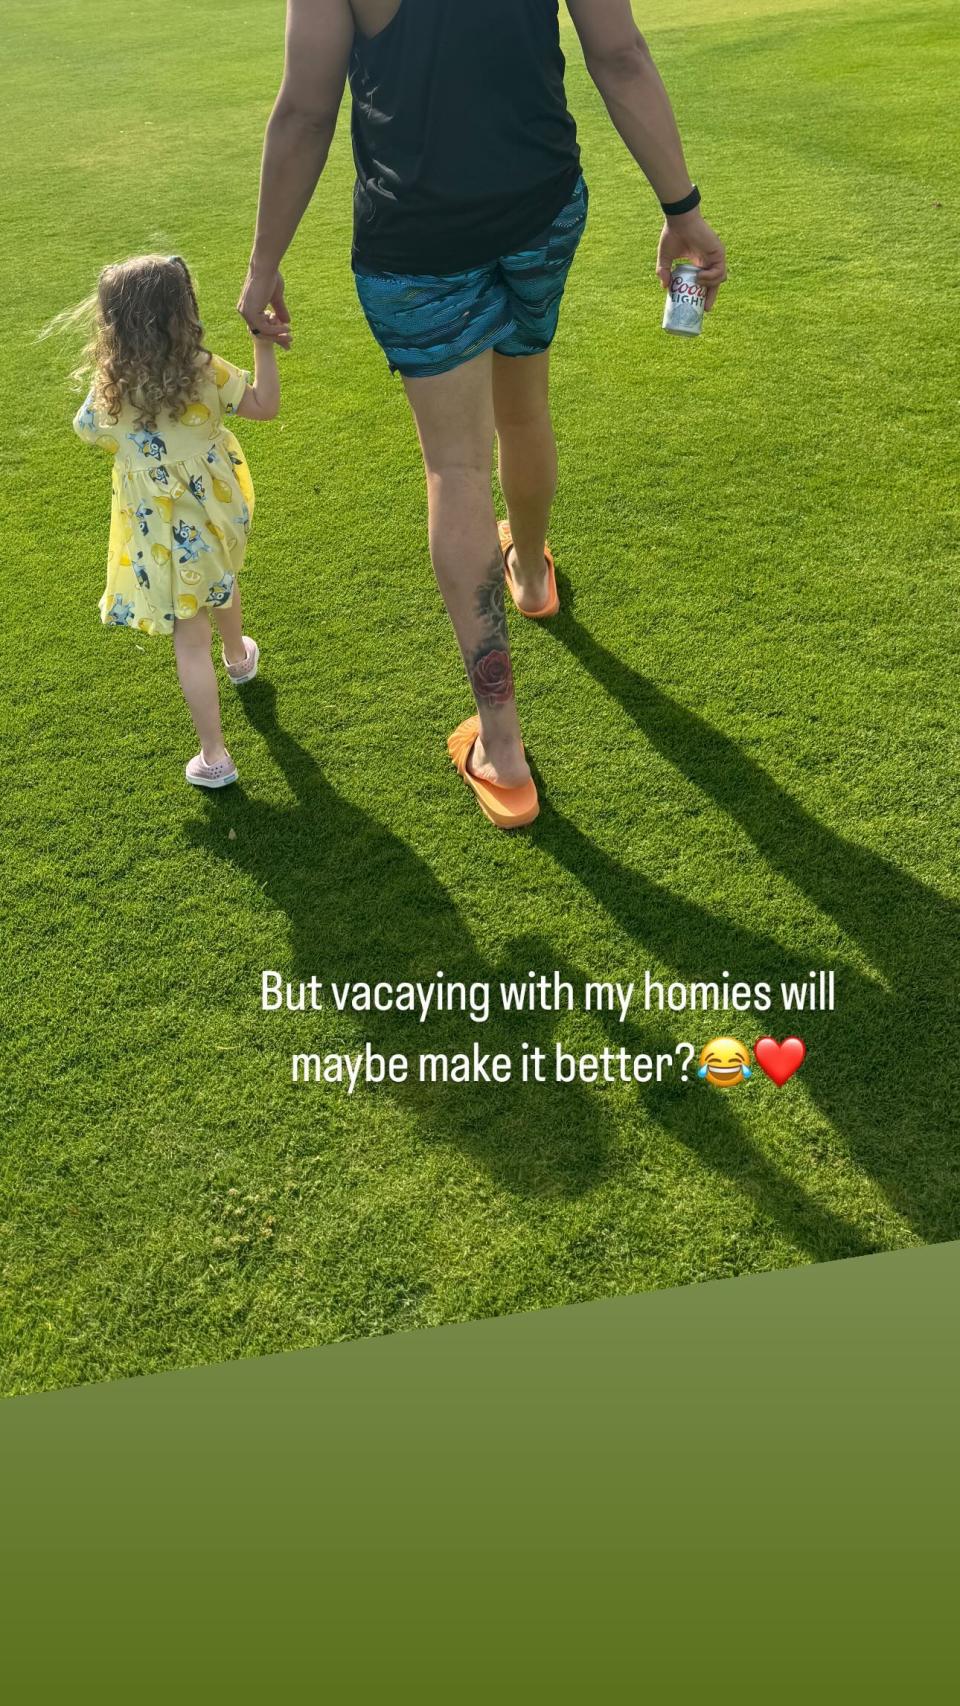 brittany mahomes fractured her back after 2 kids